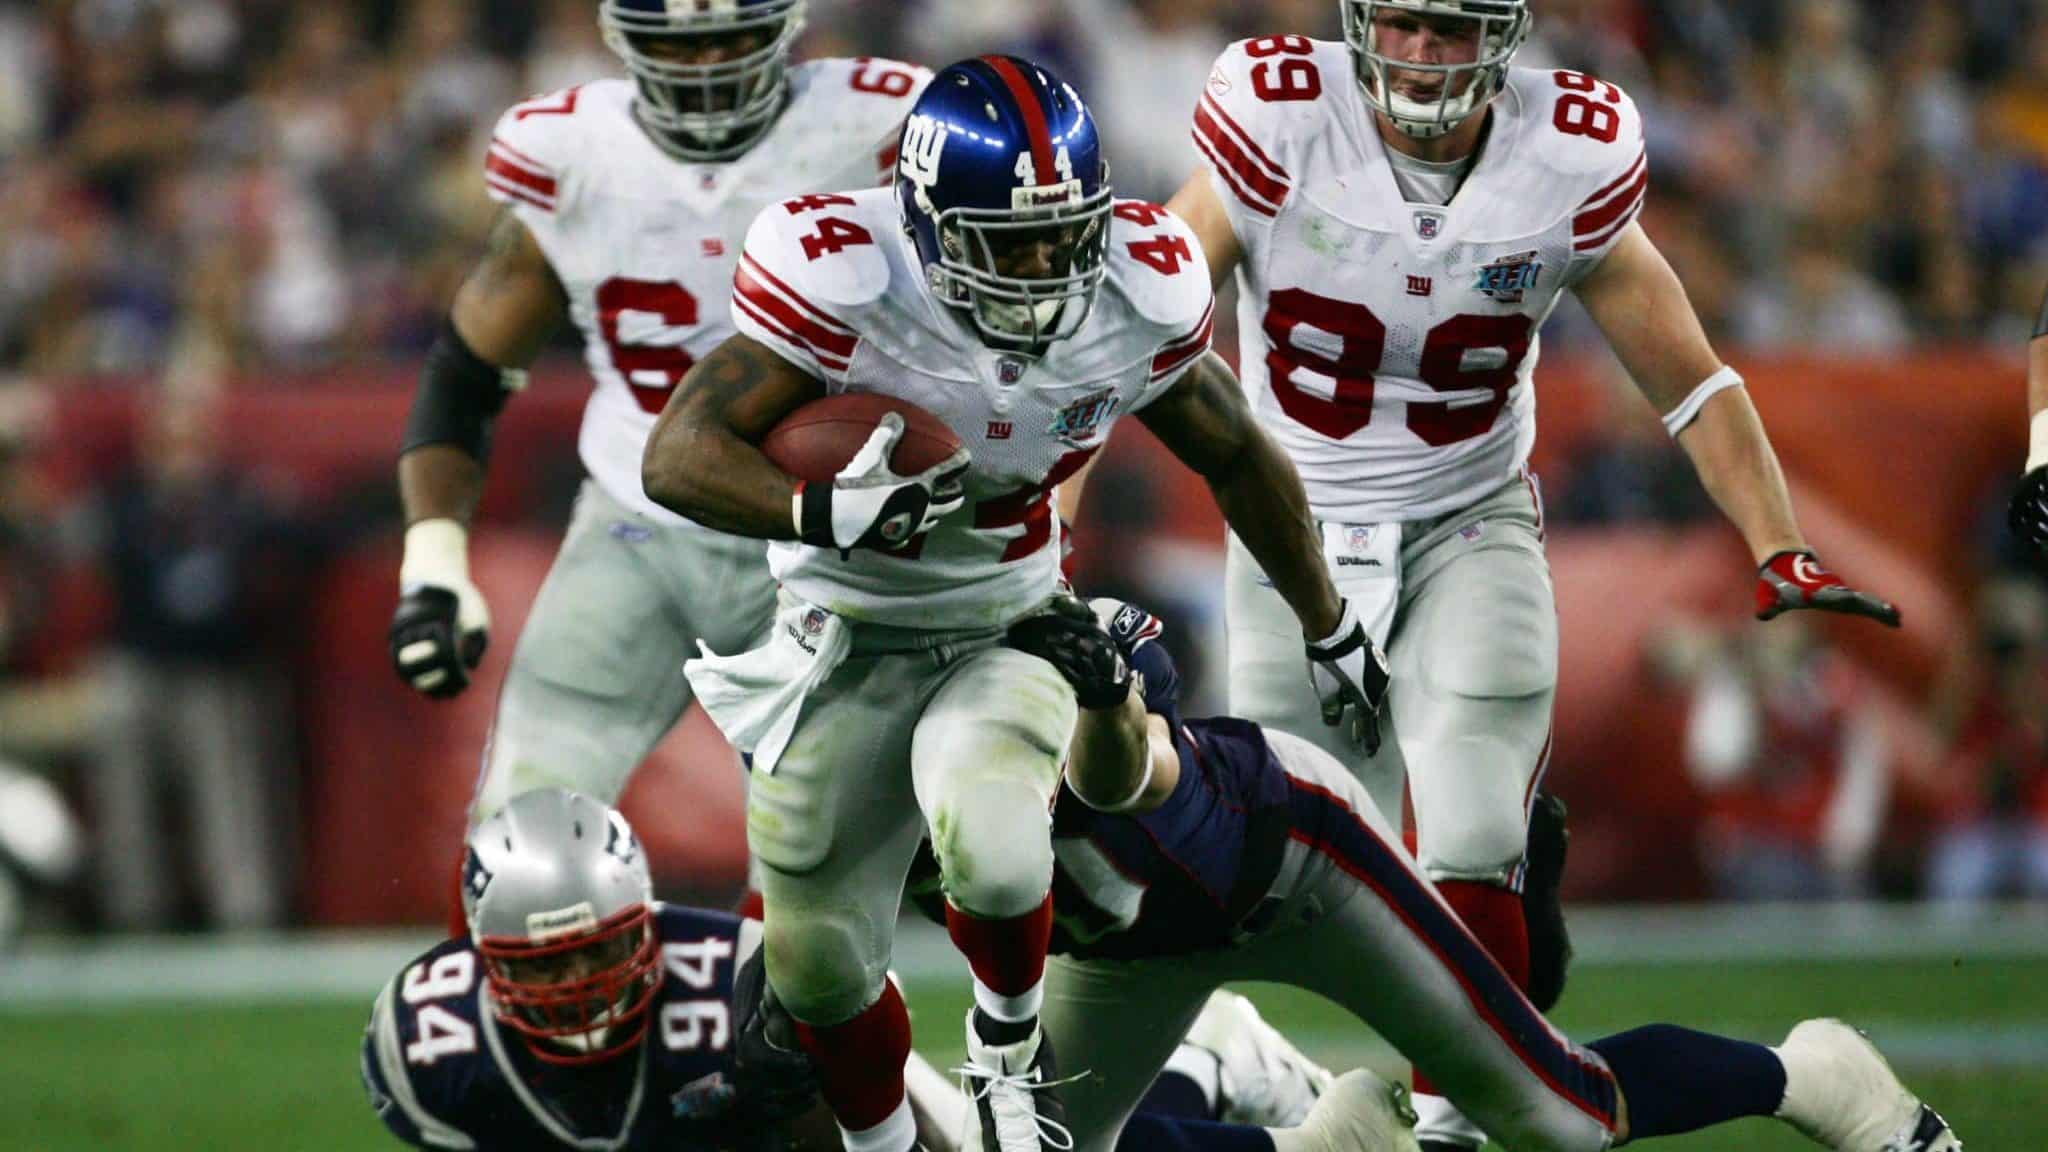 GLENDALE, AZ - FEBRUARY 03: Running back Ahmad Bradshaw #44 of the New York Giants carries the football through the New England Patriots defense in the second quarter during Super Bowl XLII on February 3, 2008 at the University of Phoenix Stadium in Glendale, Arizona.